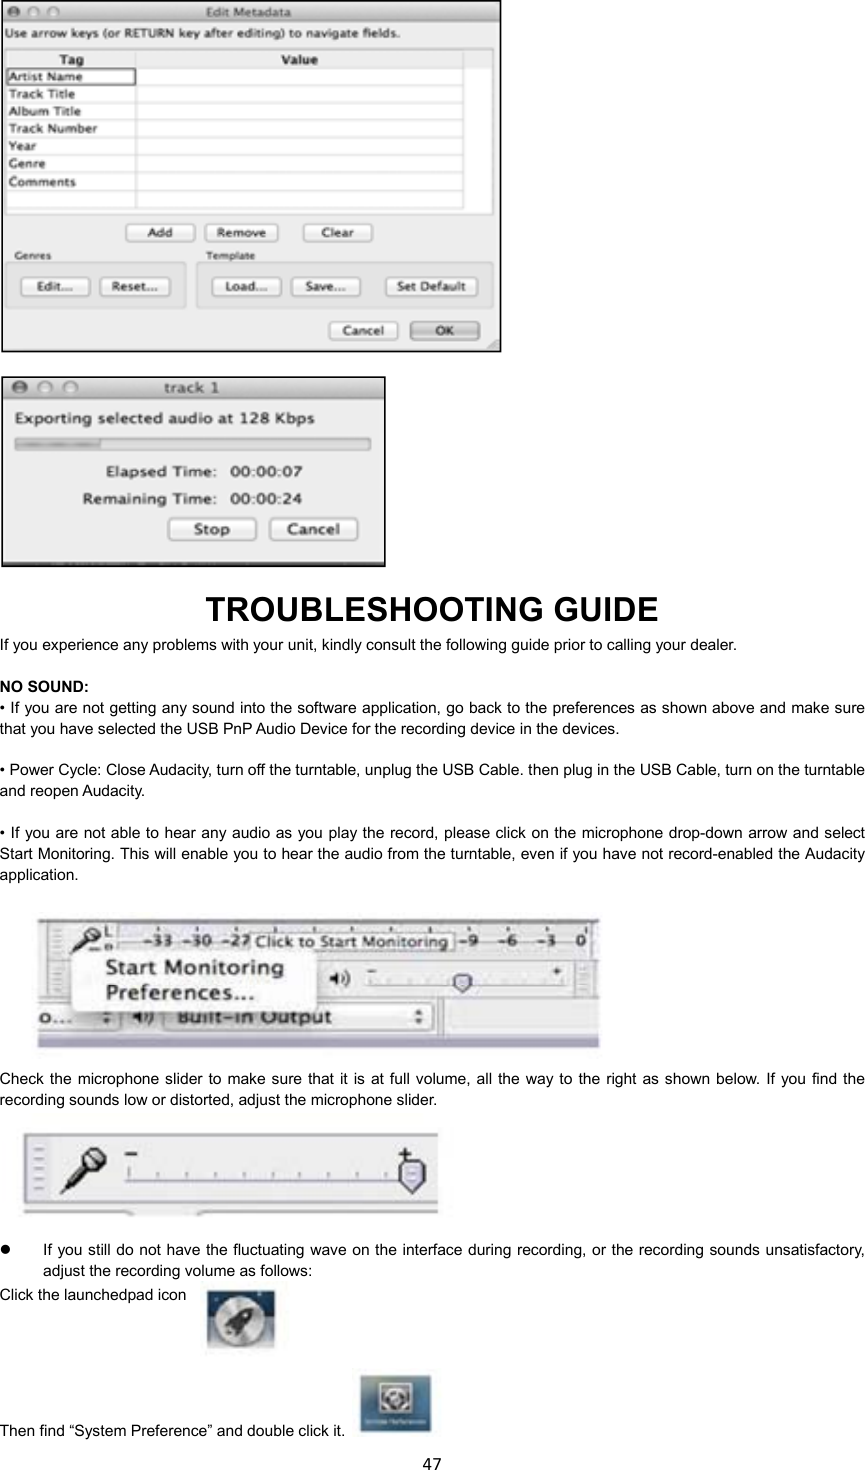 47       TROUBLESHOOTING GUIDE If you experience any problems with your unit, kindly consult the following guide prior to calling your dealer.  NO SOUND:       • If you are not getting any sound into the software application, go back to the preferences as shown above and make sure that you have selected the USB PnP Audio Device for the recording device in the devices.        • Power Cycle: Close Audacity, turn off the turntable, unplug the USB Cable. then plug in the USB Cable, turn on the turntable and reopen Audacity.      • If you  are not able to hear any audio as you play the record, please click on the microphone drop-down arrow and select Start Monitoring. This will enable you to hear the audio from the turntable, even if you have not record-enabled the Audacity application.     Check the microphone slider to make sure that it is  at full volume,  all  the way to  the  right as shown below. If  you find the recording sounds low or distorted, adjust the microphone slider.      If you still do not  have the fluctuating wave on the interface during recording, or the recording sounds unsatisfactory, adjust the recording volume as follows: Click the launchedpad icon   Then find “System Preference” and double click it.  